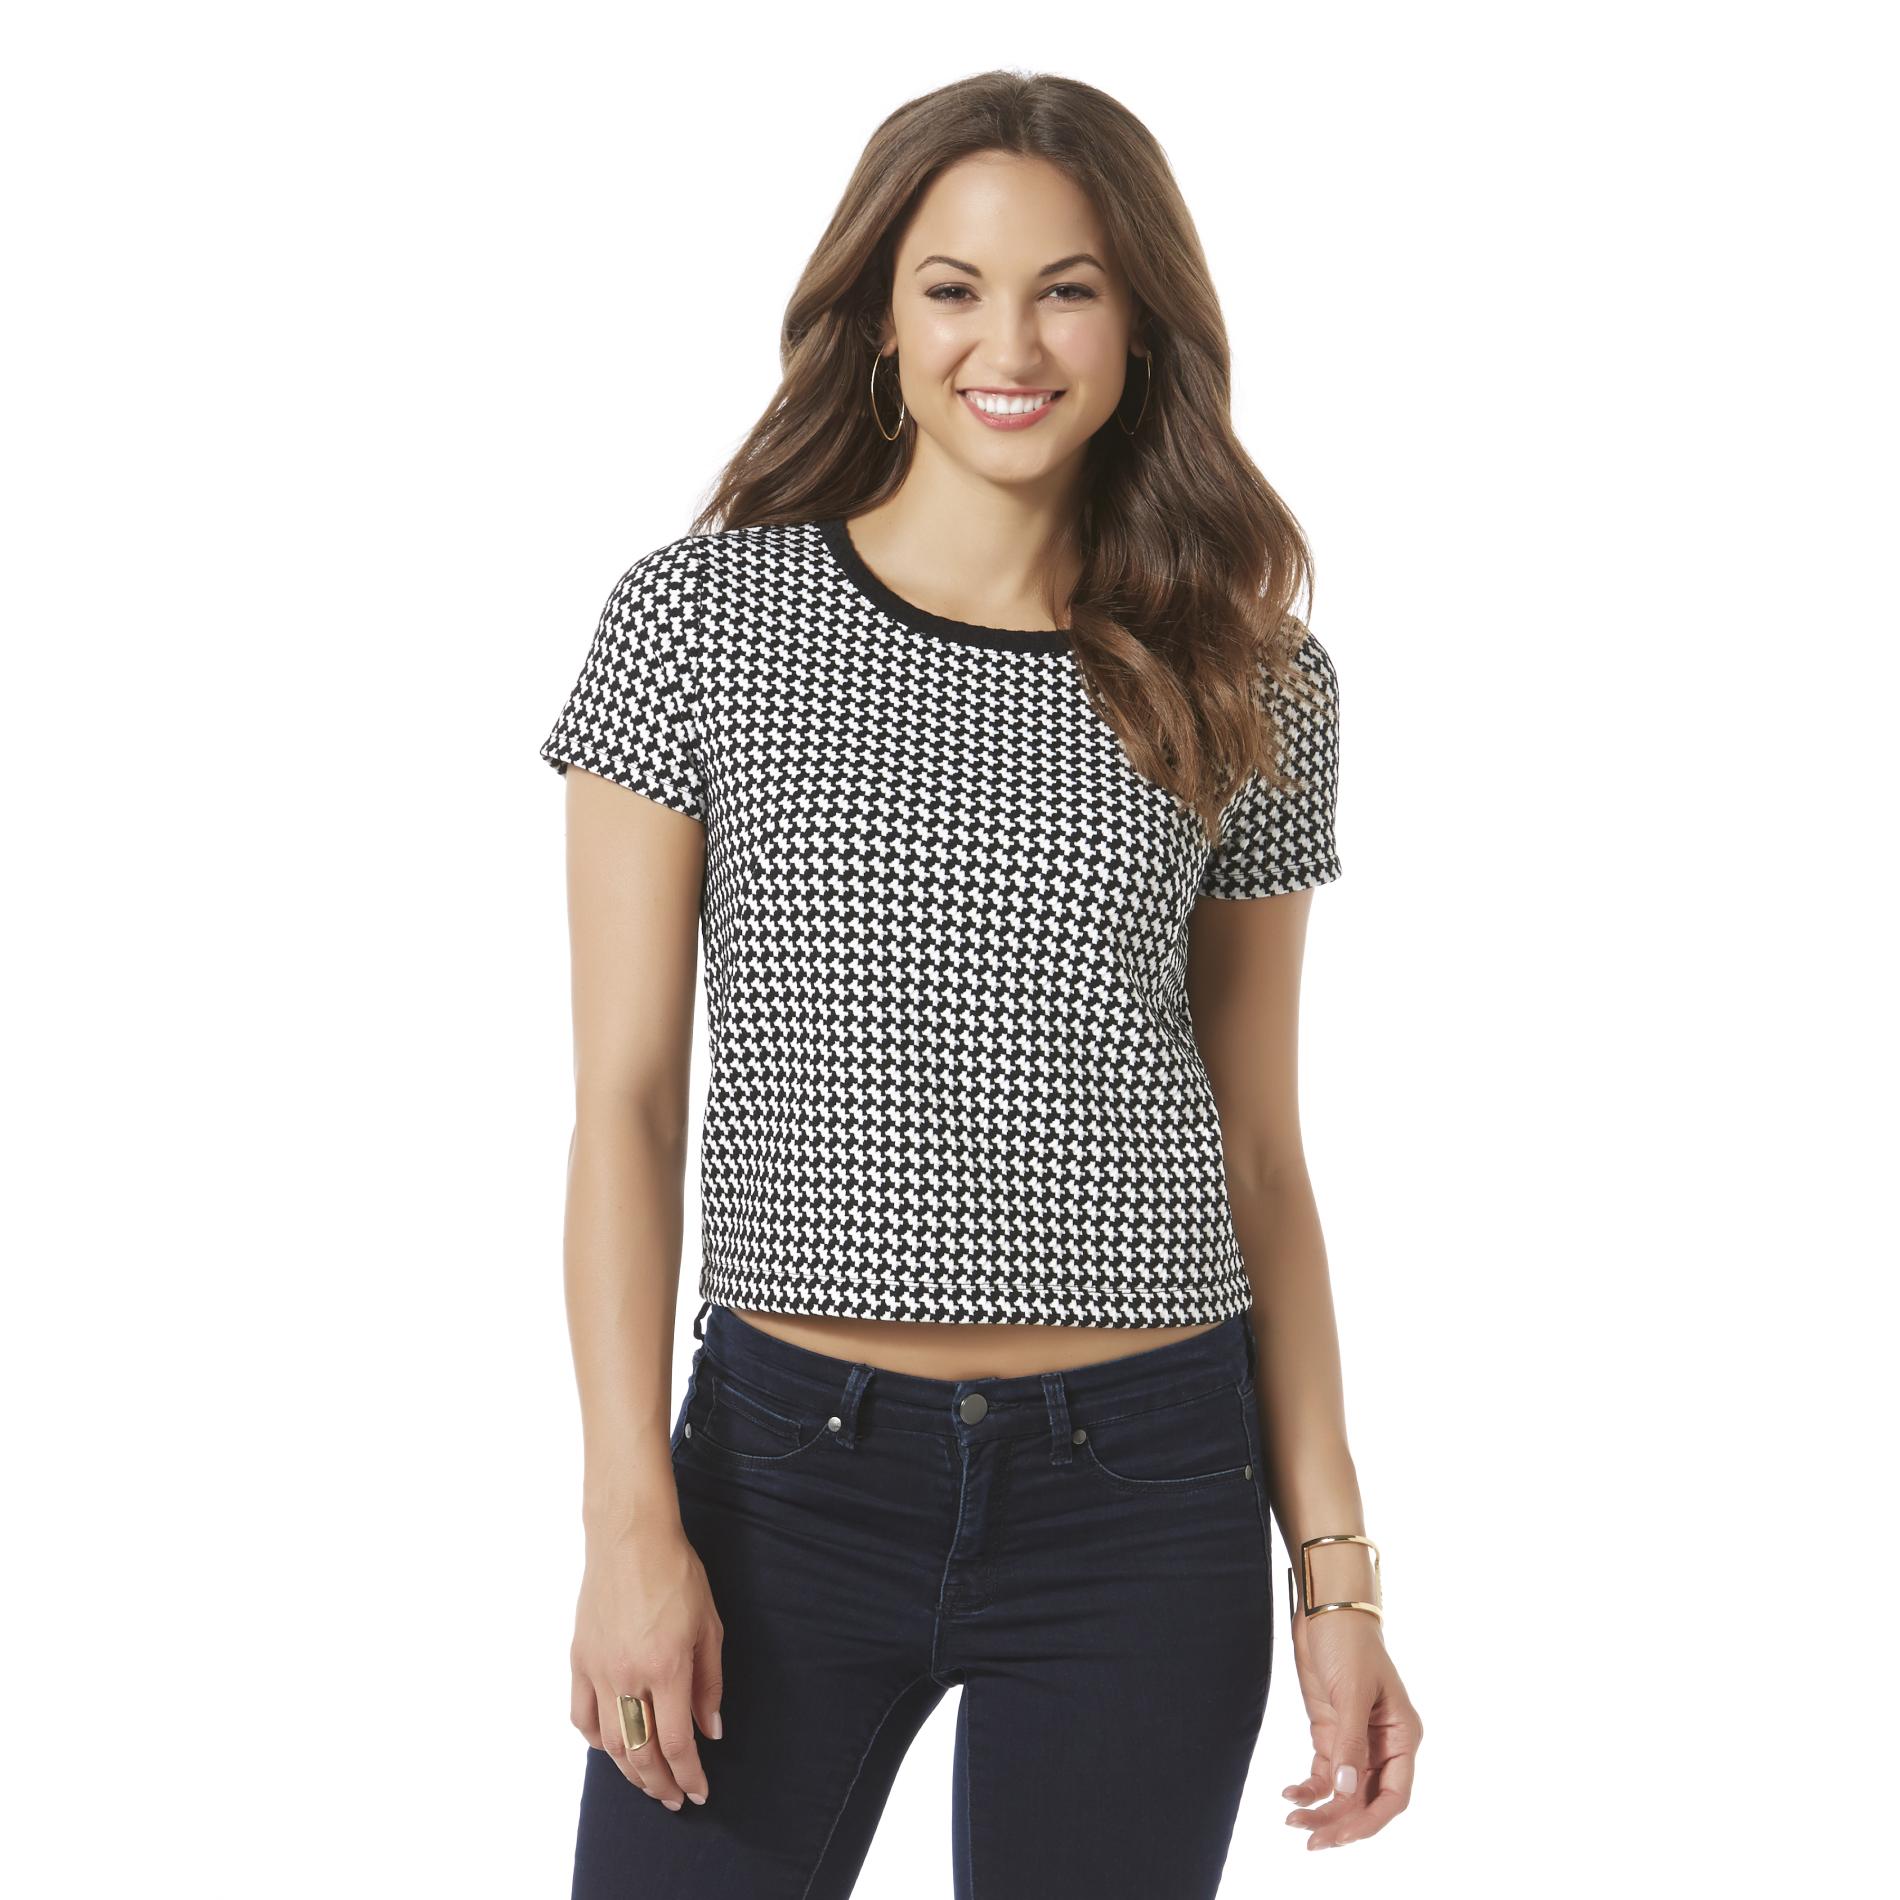 Attention Women's Cap Sleeve Top - Houndstooth Check